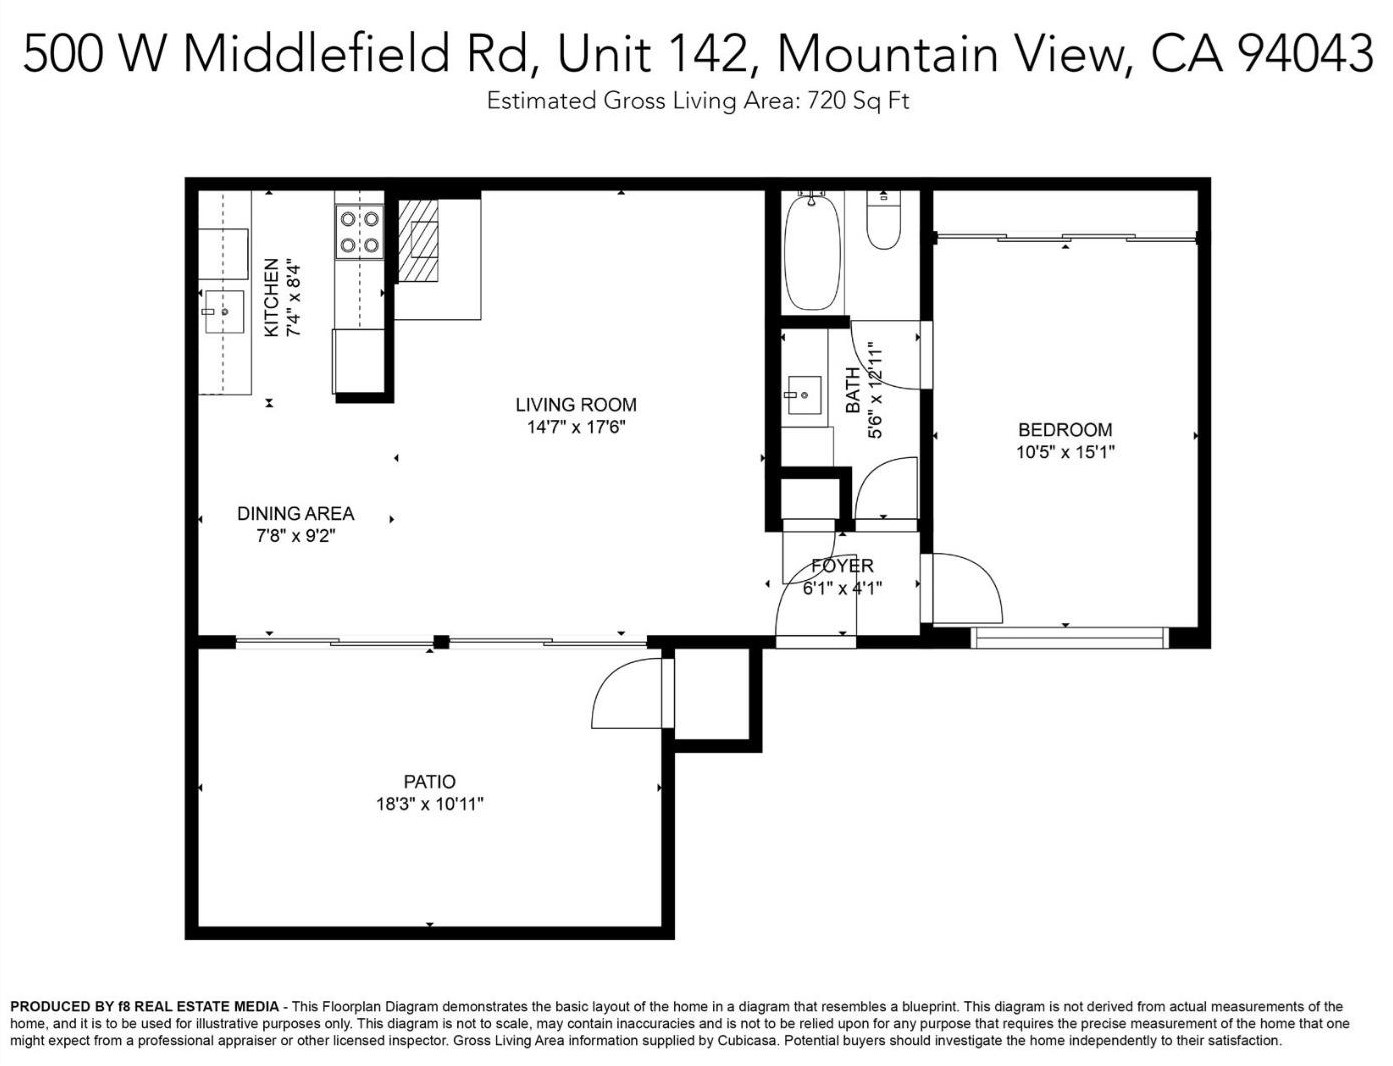 500 Middlefield Rd, Mountain View CA  94043-3420 exterior